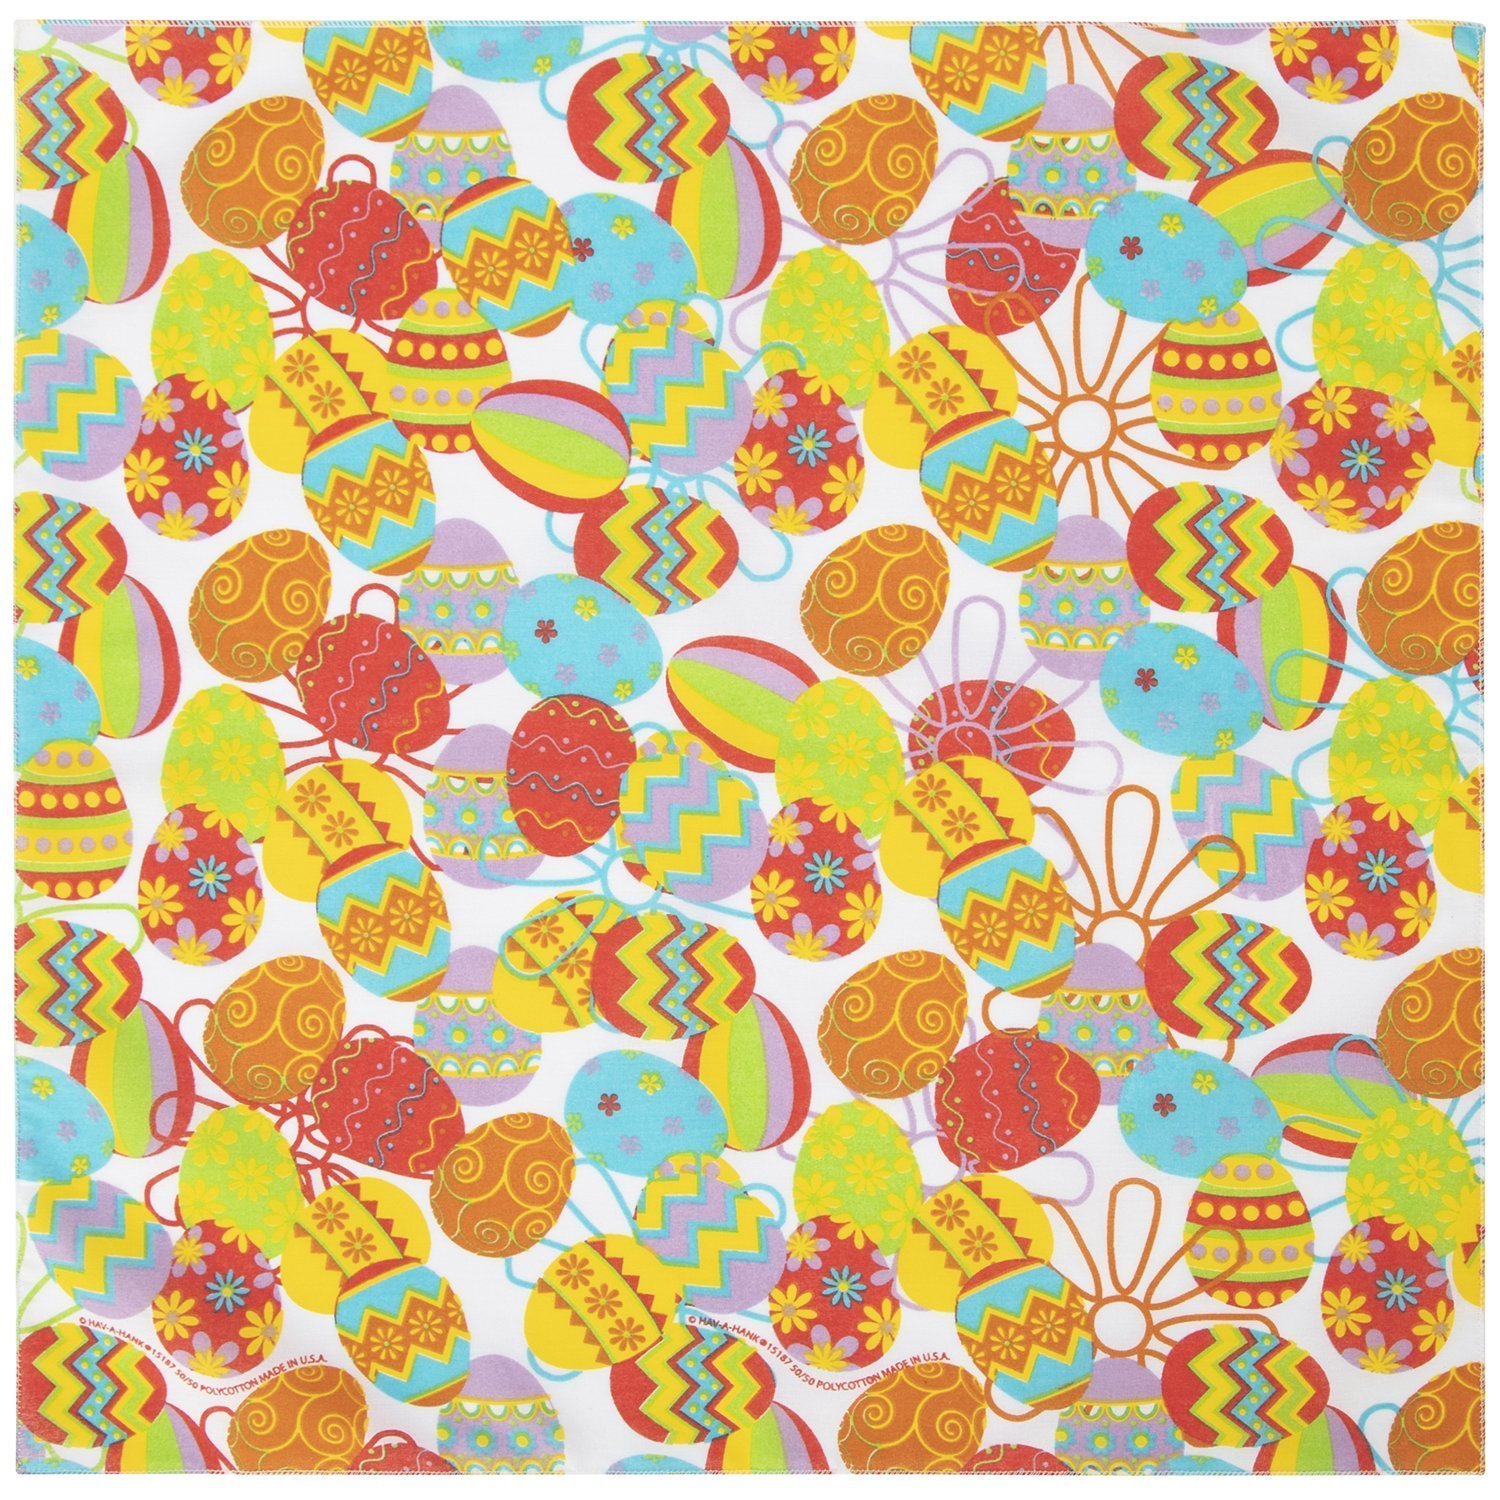 12-pack Tossed Easter Eggs Bandanas, by the Dozen - - 22x22